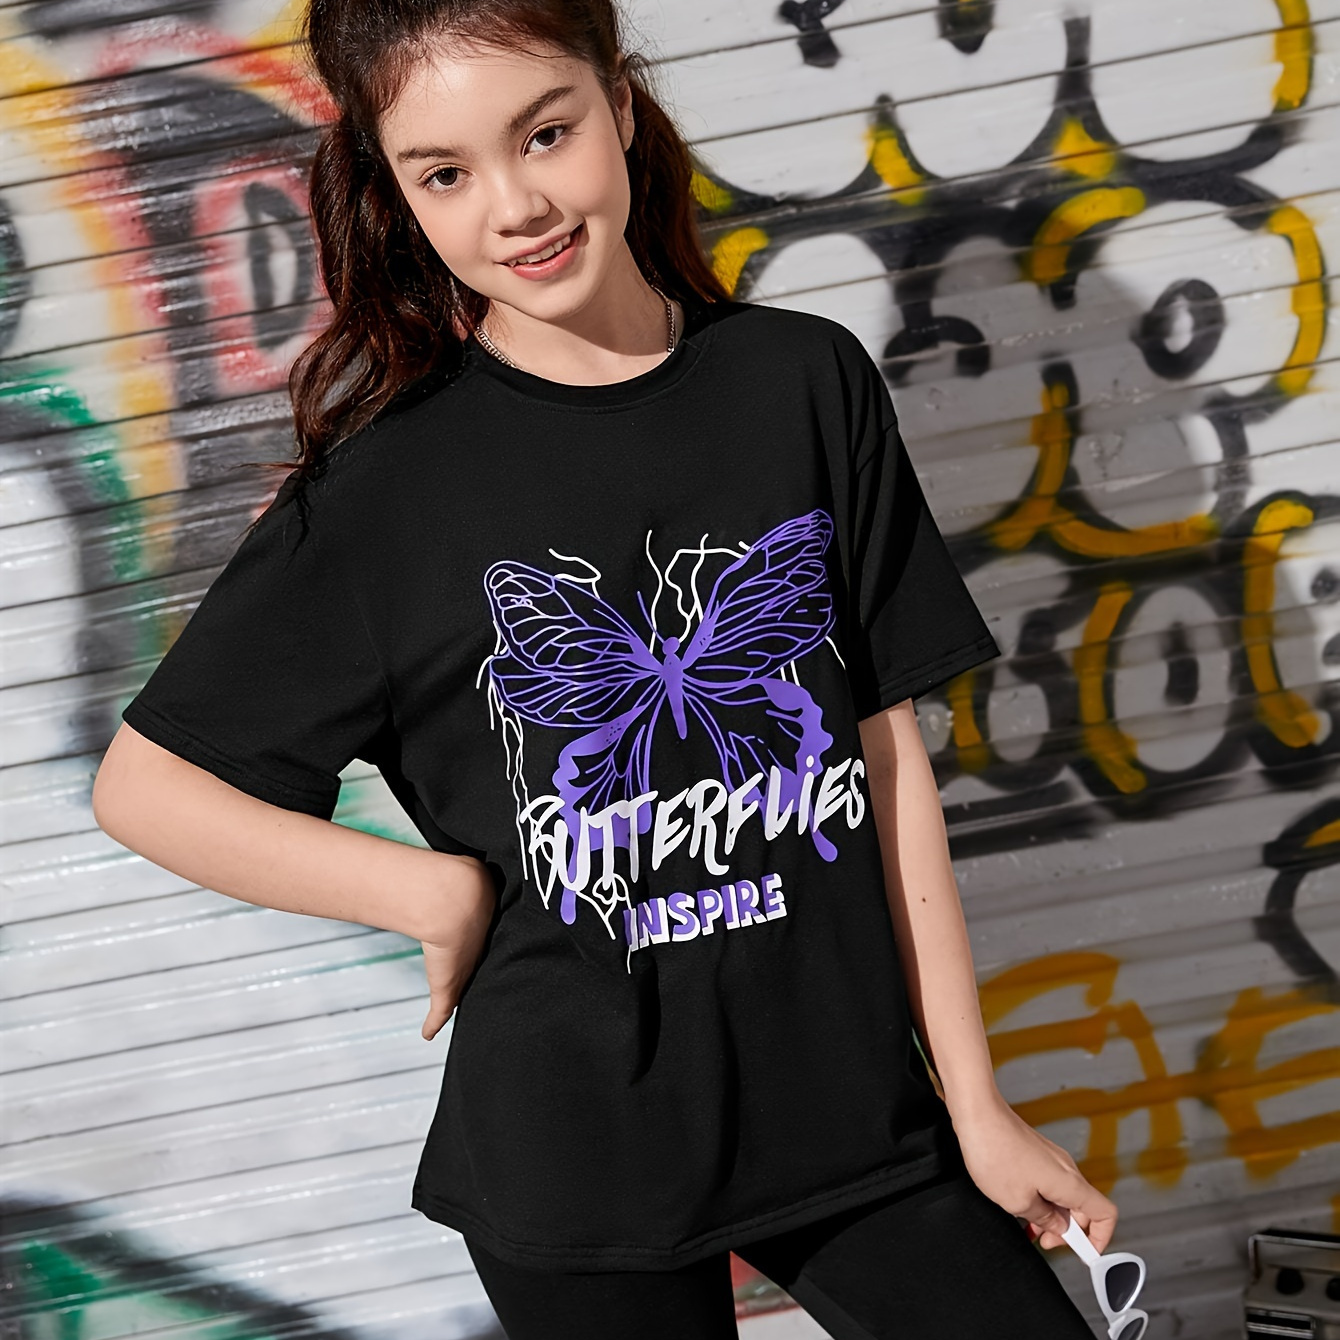 

Butterfly Graphic Letters Print Crew Neck T-shirt, Casual Versatile Short Sleeve Trendy Summer Tee Comfy Top, Girls' Clothing